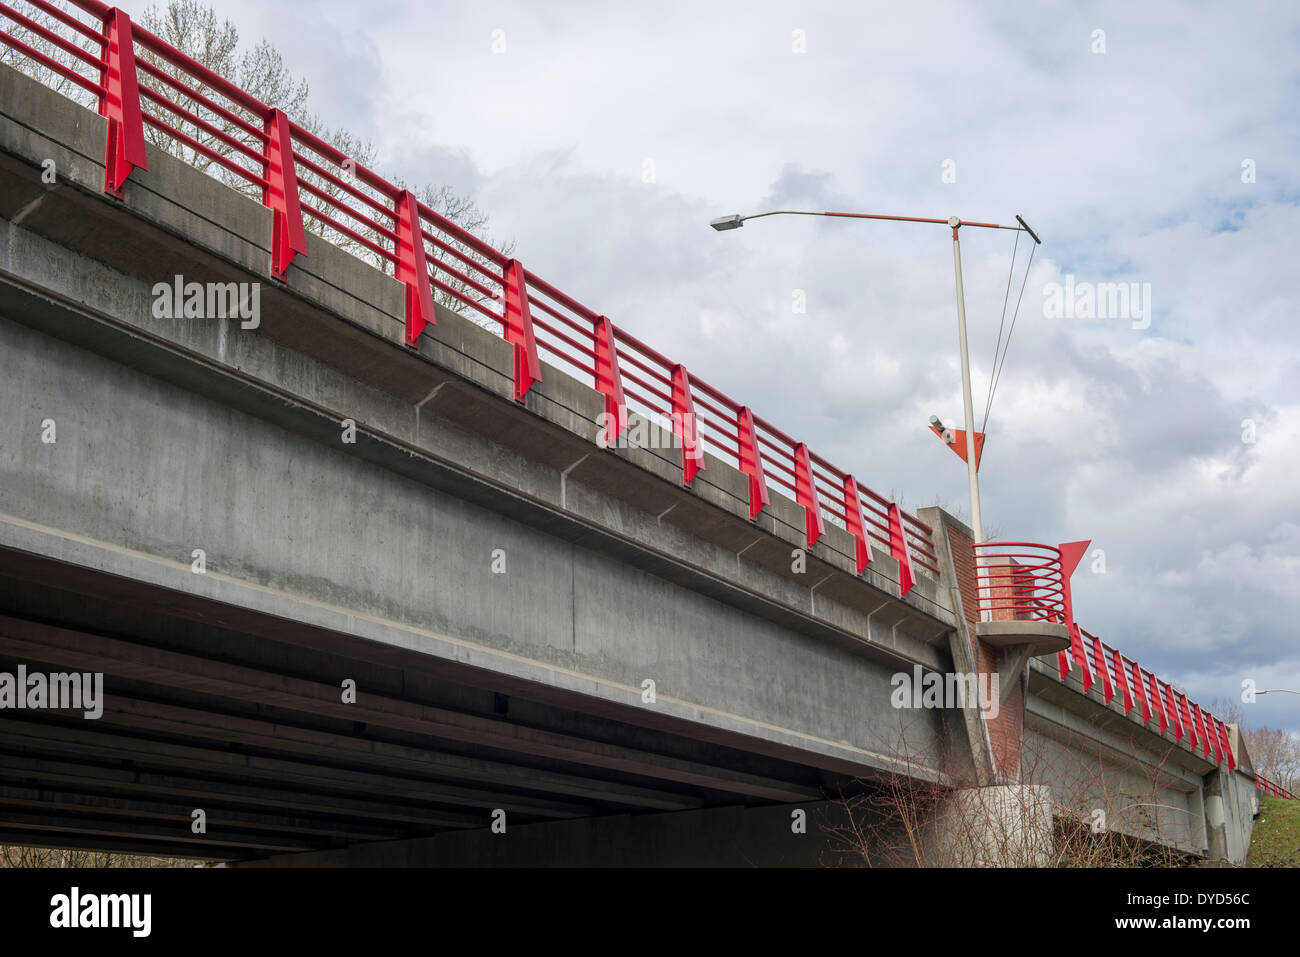 Close-up of the Guardrail of a Pedestrian Bridge Stock Photo - Image of  concrete, walkway: 212464294